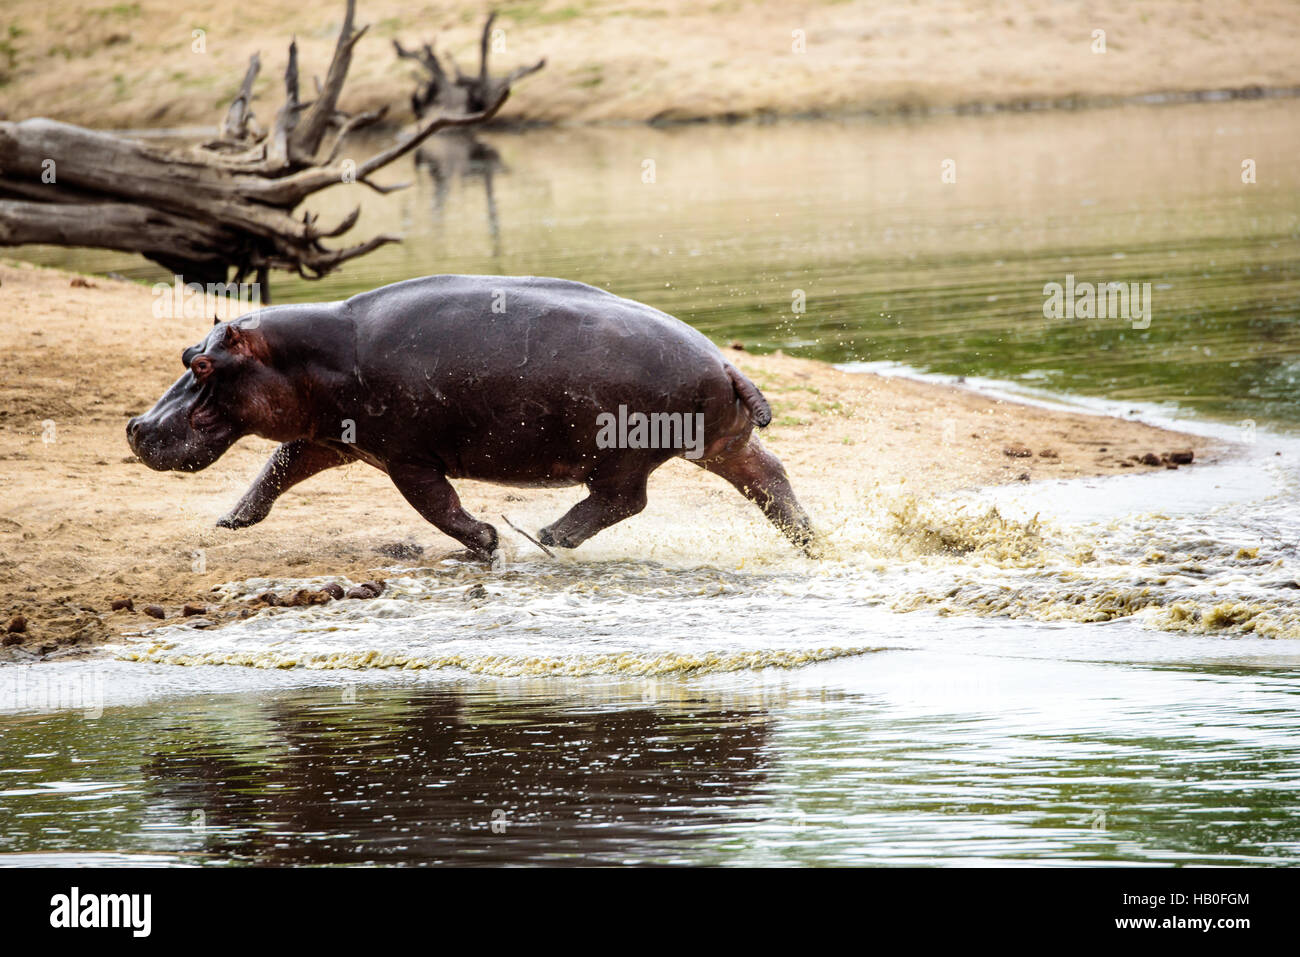 Hippo rushing out of the water at great speed Stock Photo